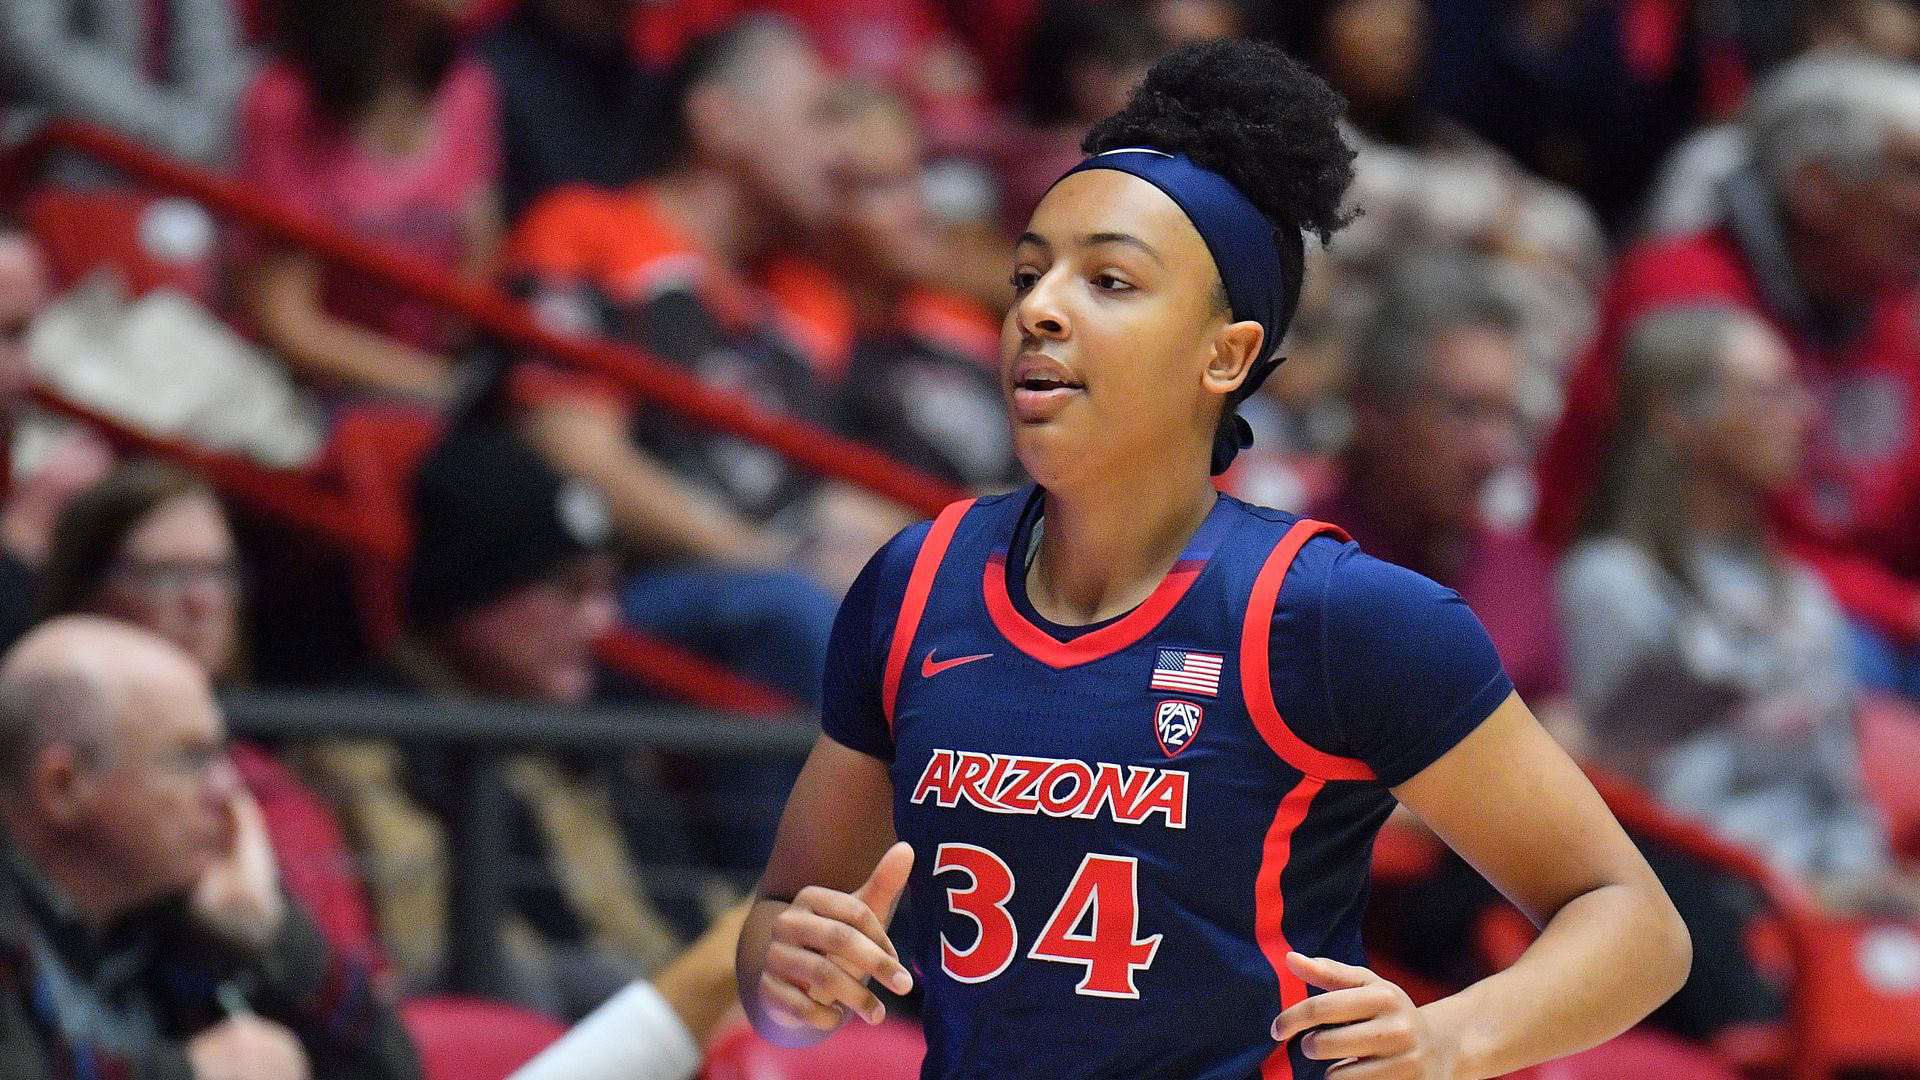 Arizona women’s basketball to hold open practice for fans